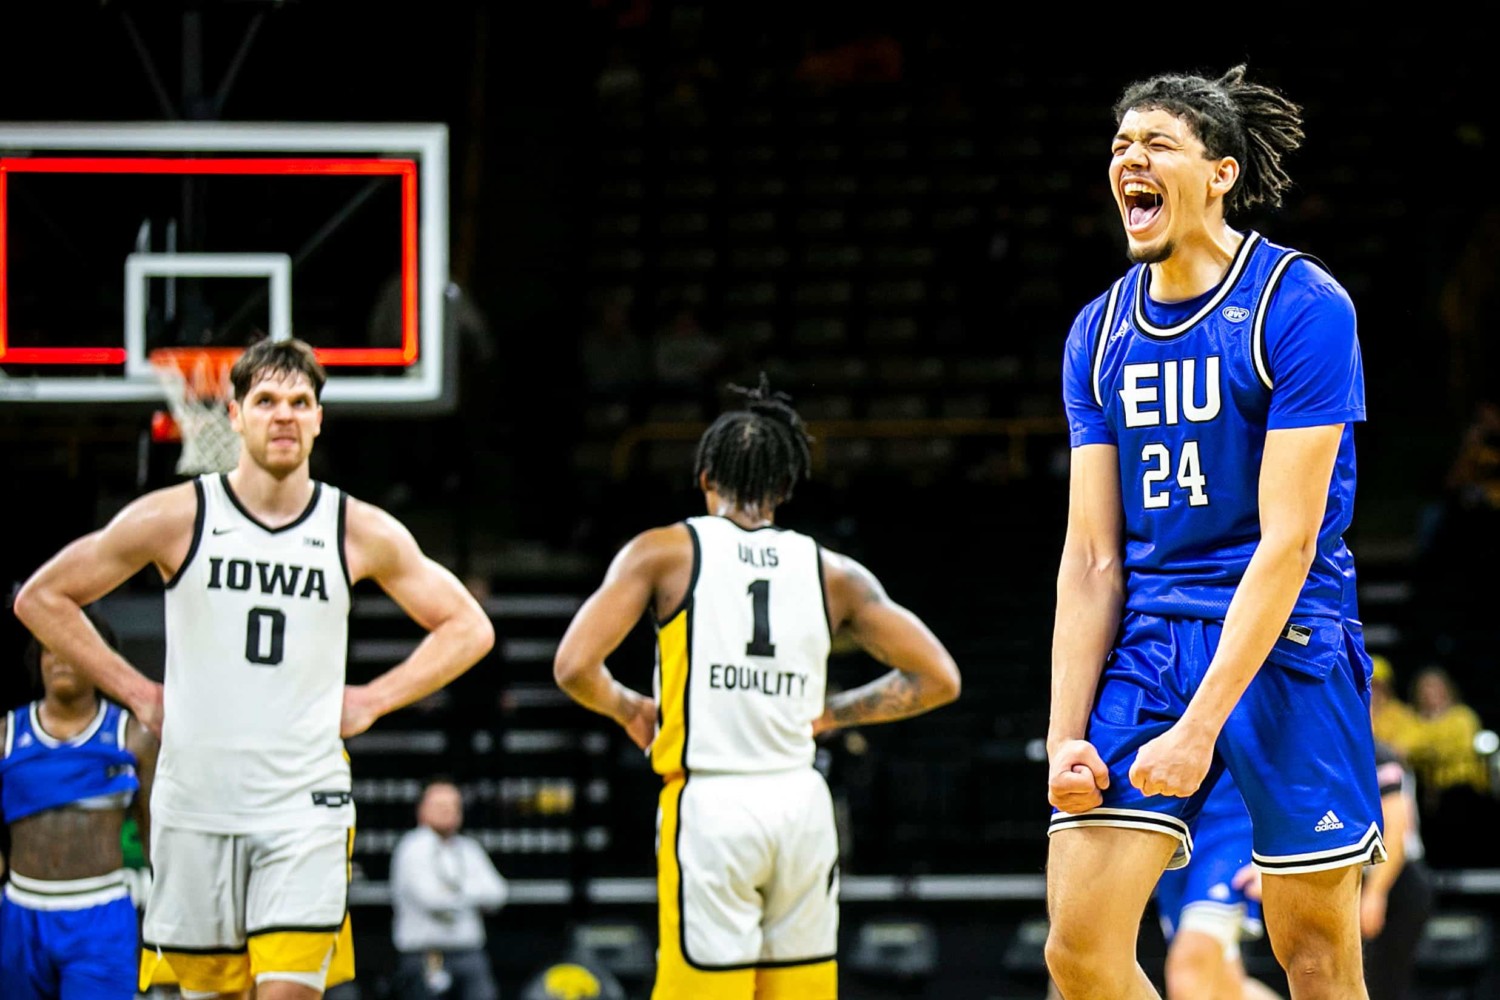 EIU players celebrate after beating Iowa in a mens college basketball matchup